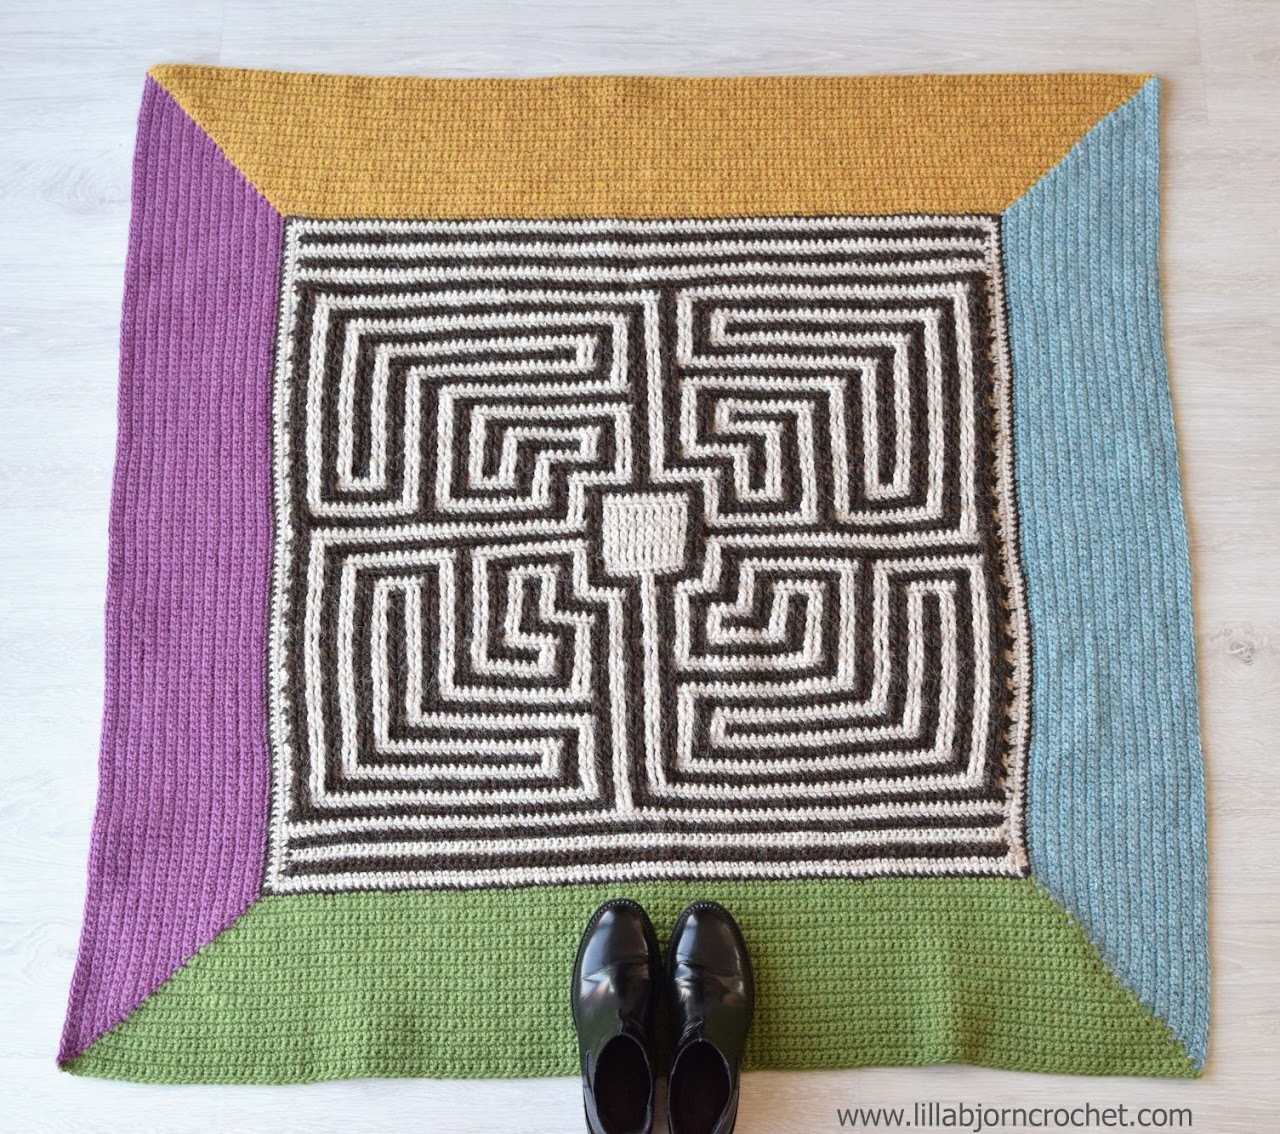 Roman Labyrinth pattern is written for both a rug and a pillow. Overlay crochet design by www.lillabjorncrochet.com